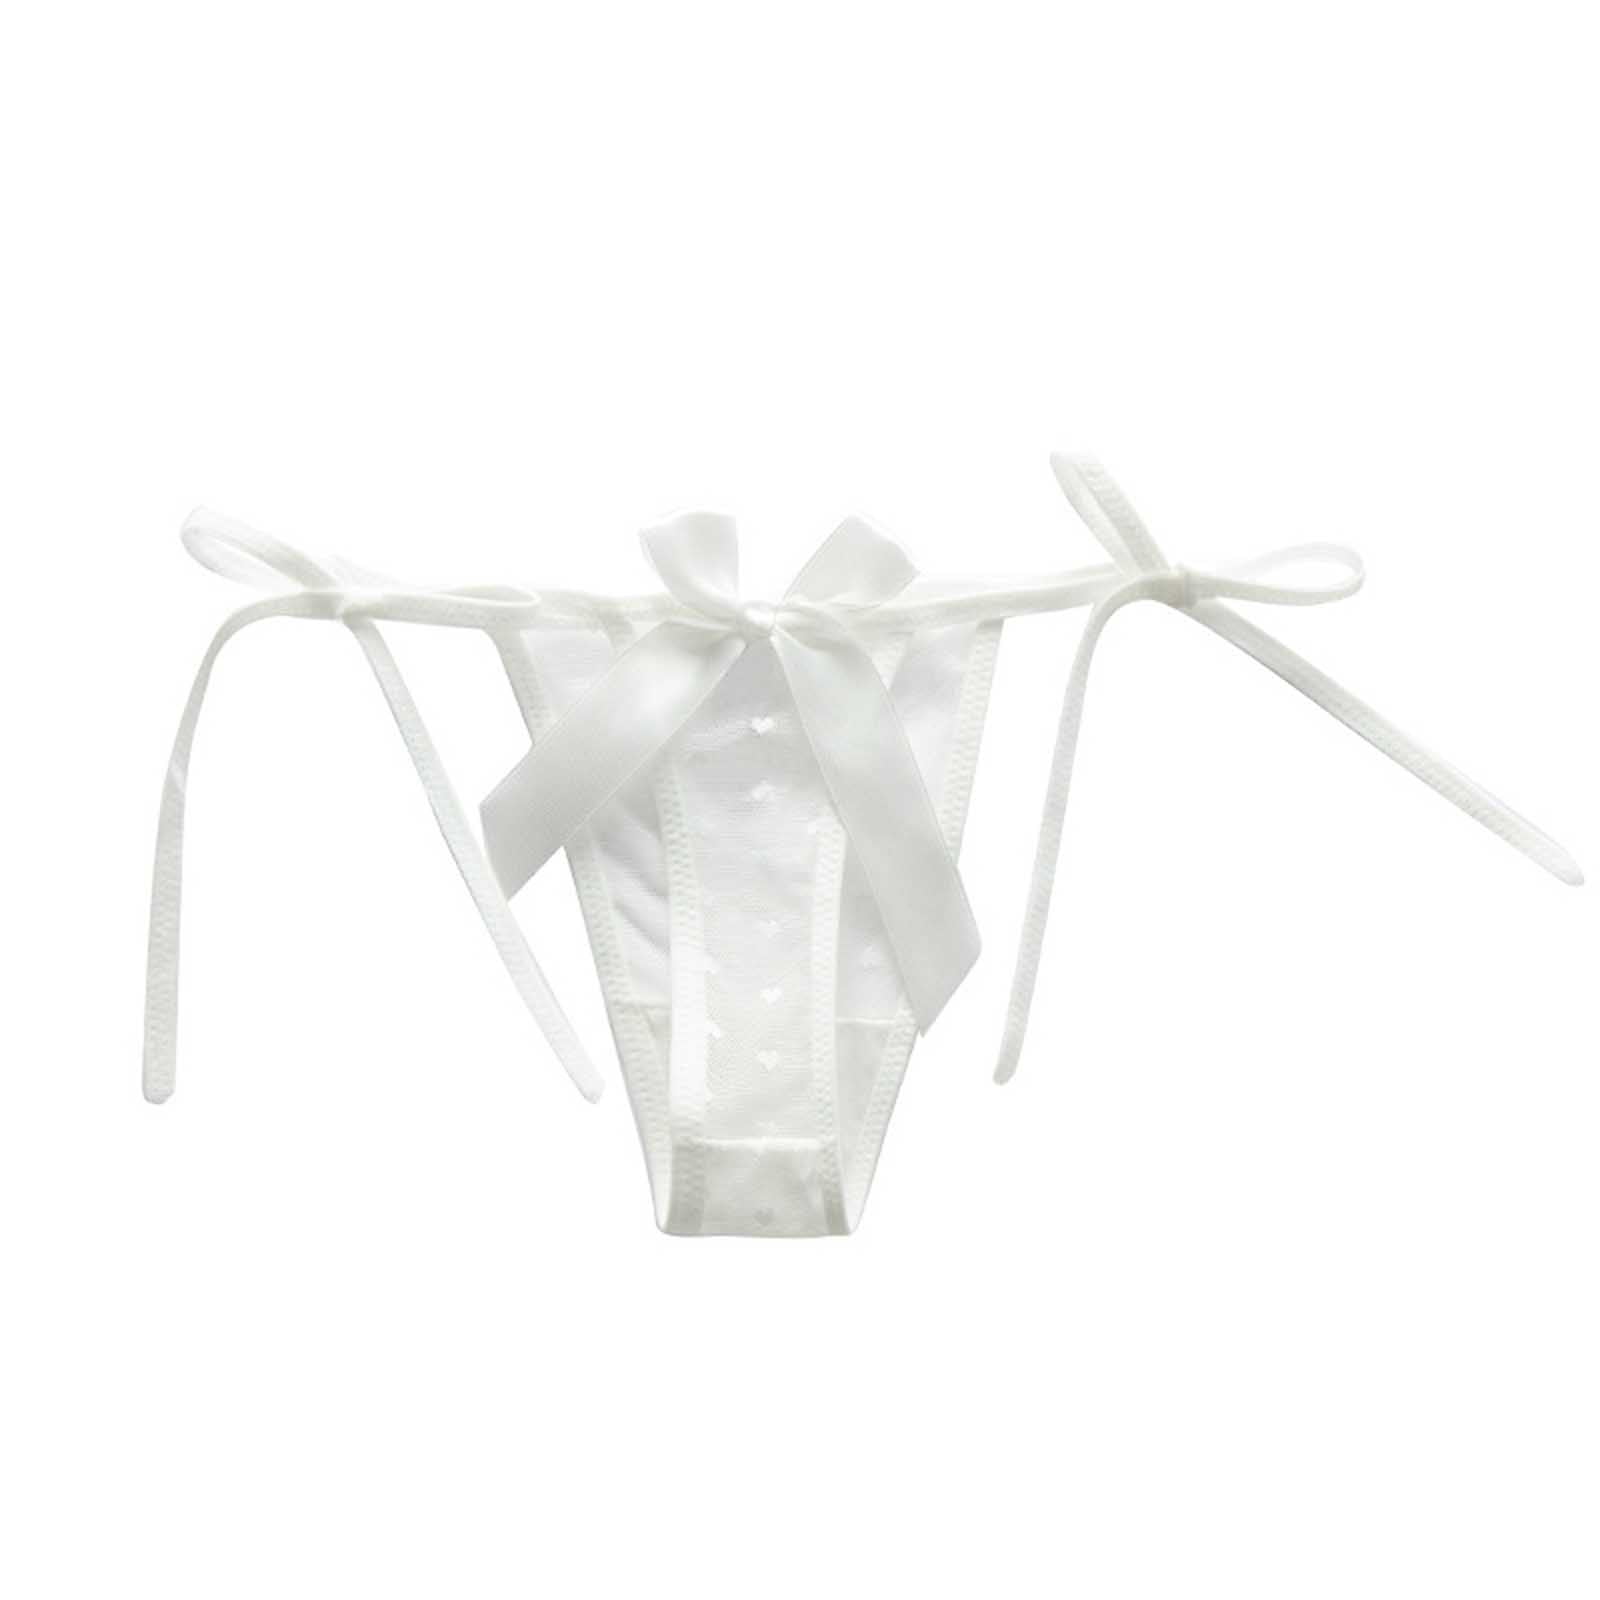 1PCS 100% Organic White Cotton Comfy Ladies Thong Panties With Cute Bow  Women's Underwear Handmade Bridal Lingerie -  Israel